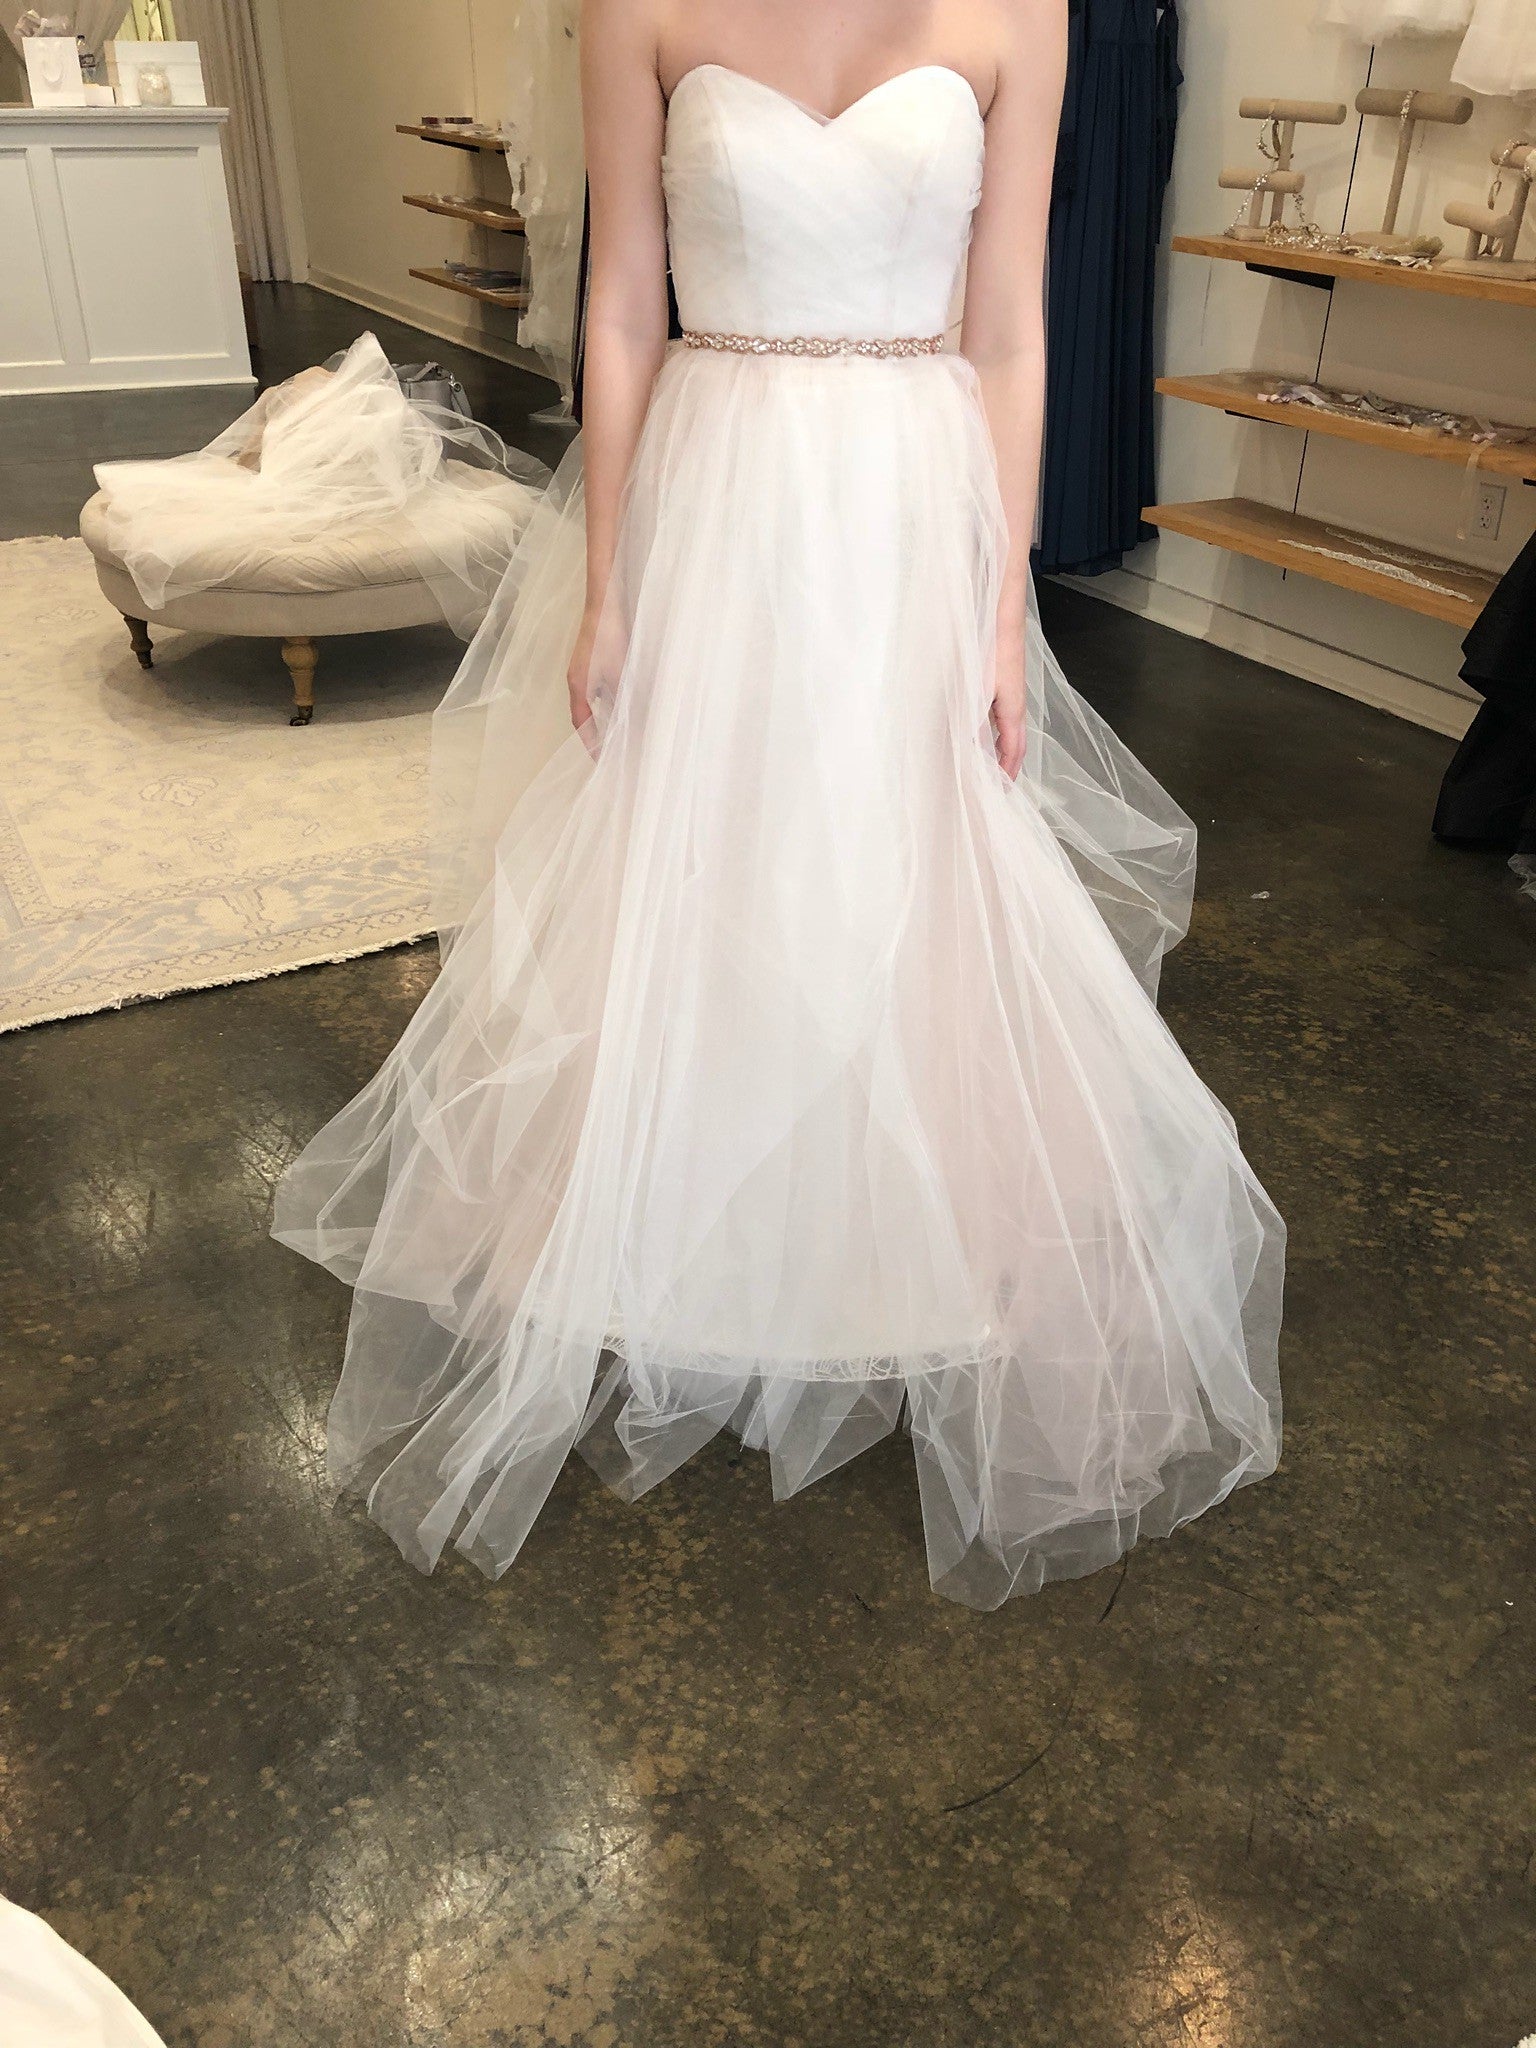 Blush by Hayley Paige Bella Candi Gown